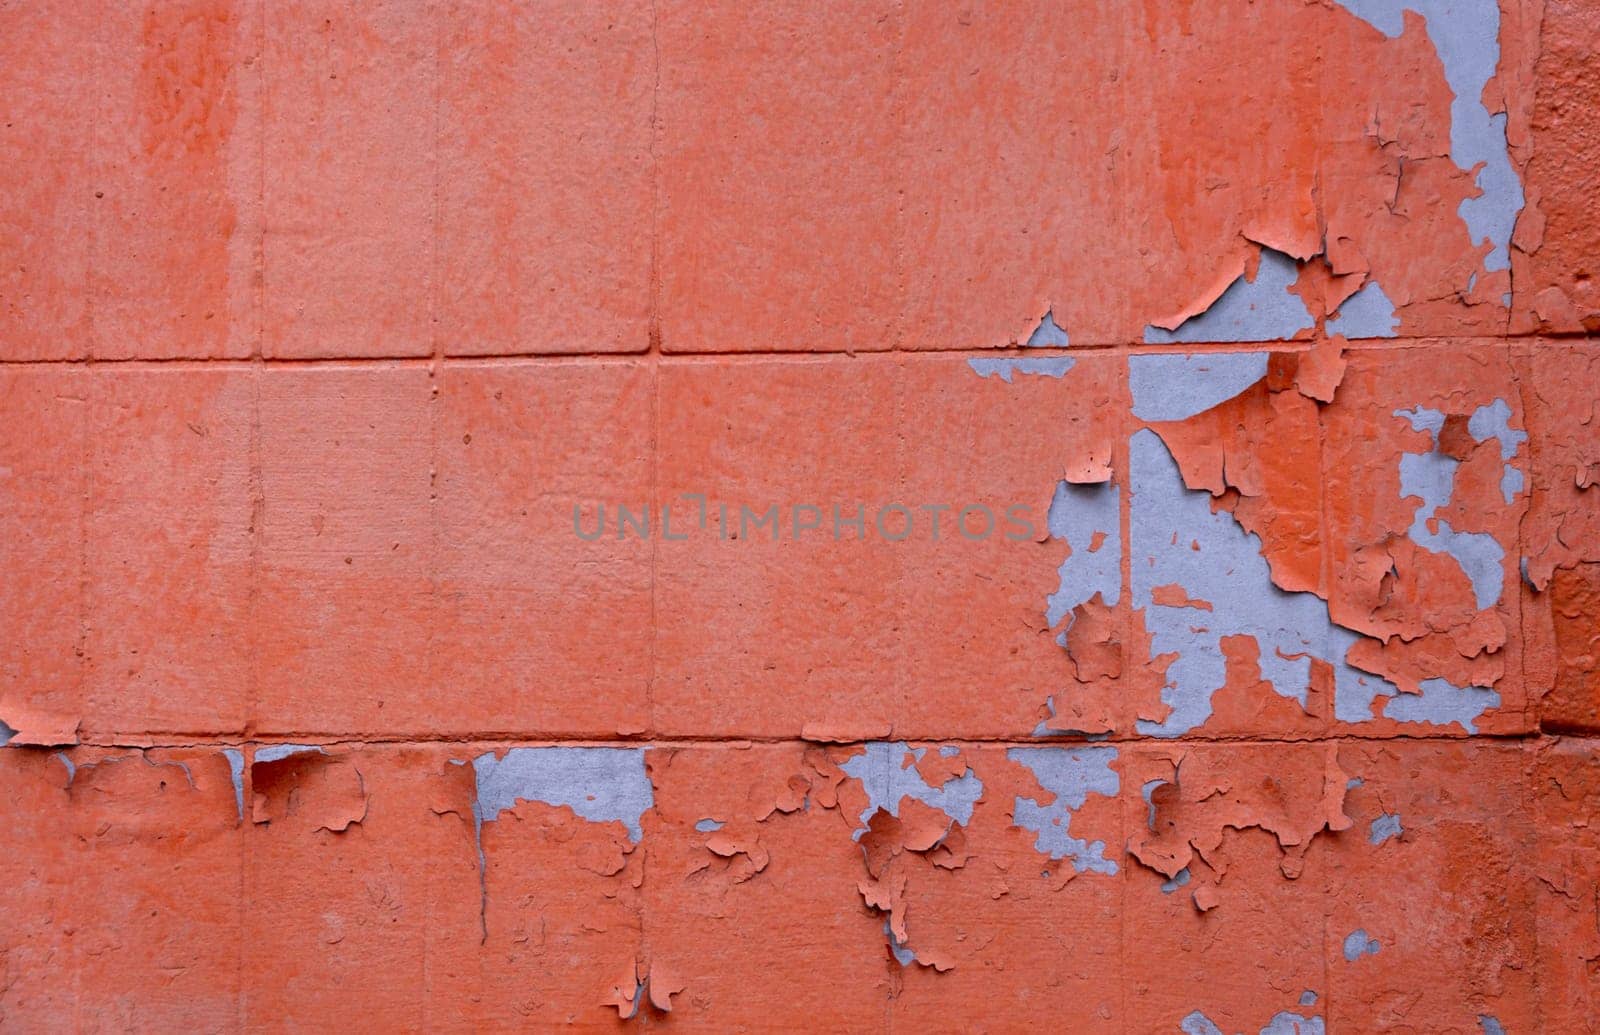 Grunge Concrete Wall Texture peeling paint, old cracked wall peach by igor010